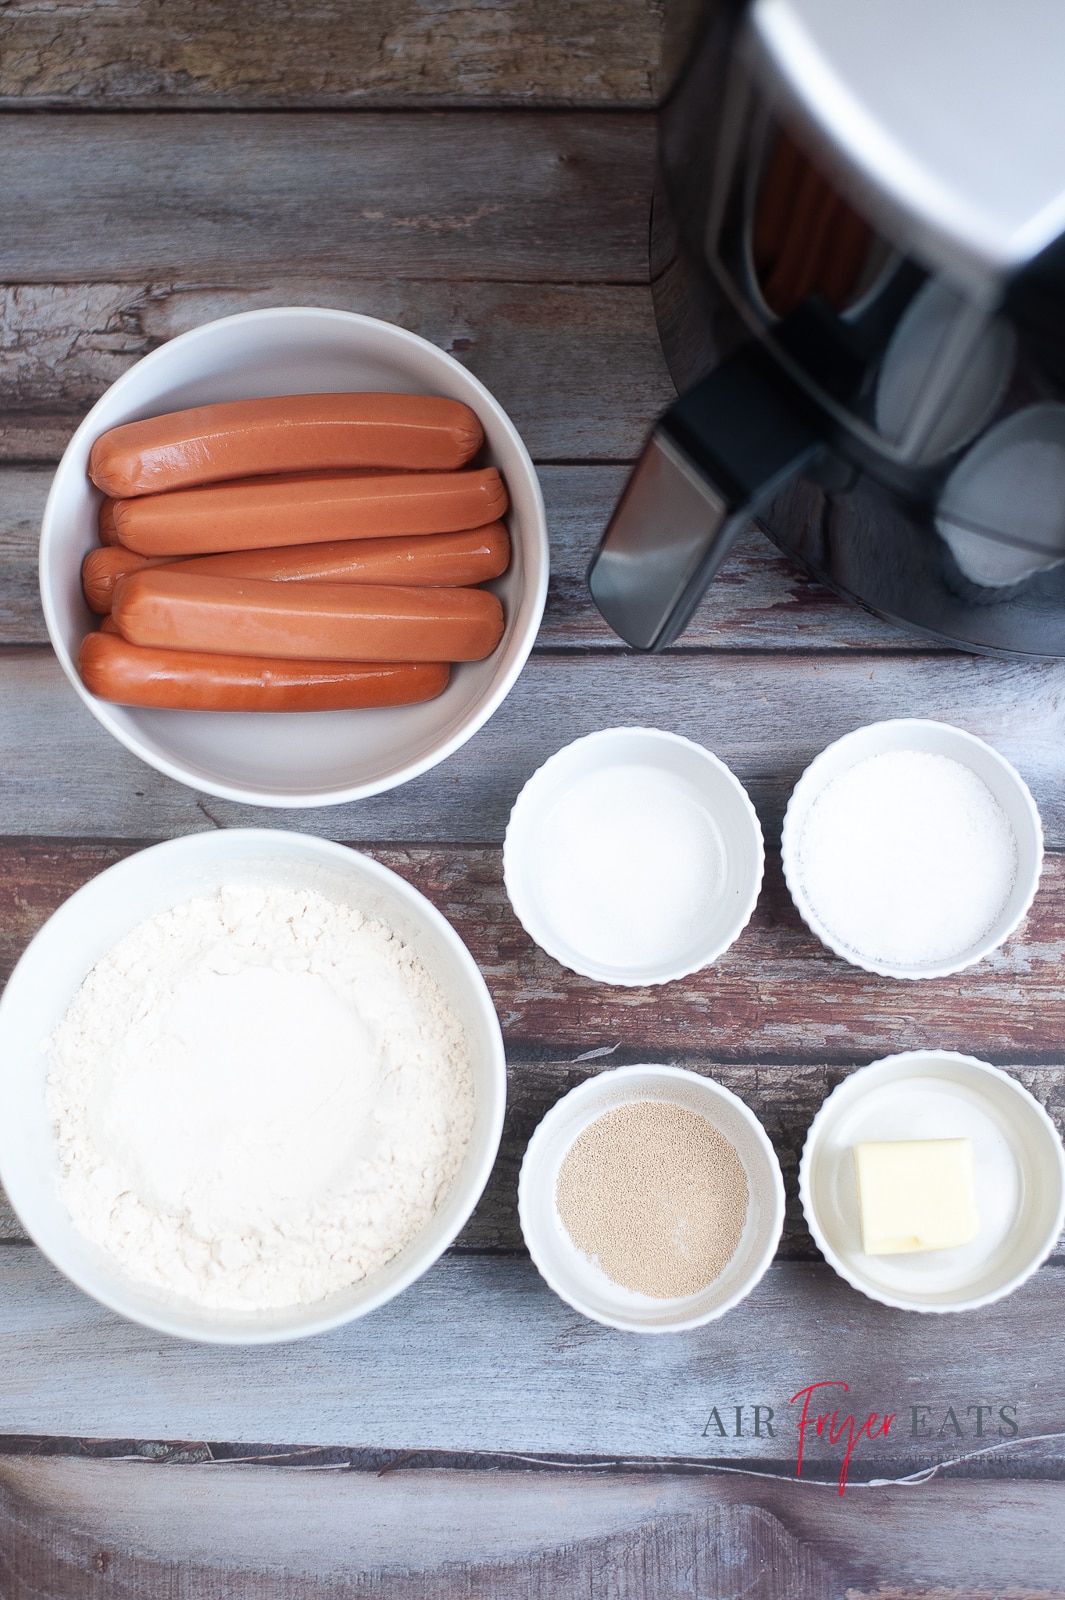 vertical photo showing the ingredients for Air Fryer Pretzel Dogs: hotdogs, flour, butter, water, yeast, sea salt and sugar with an air fryer in the background, all on a wooden surface